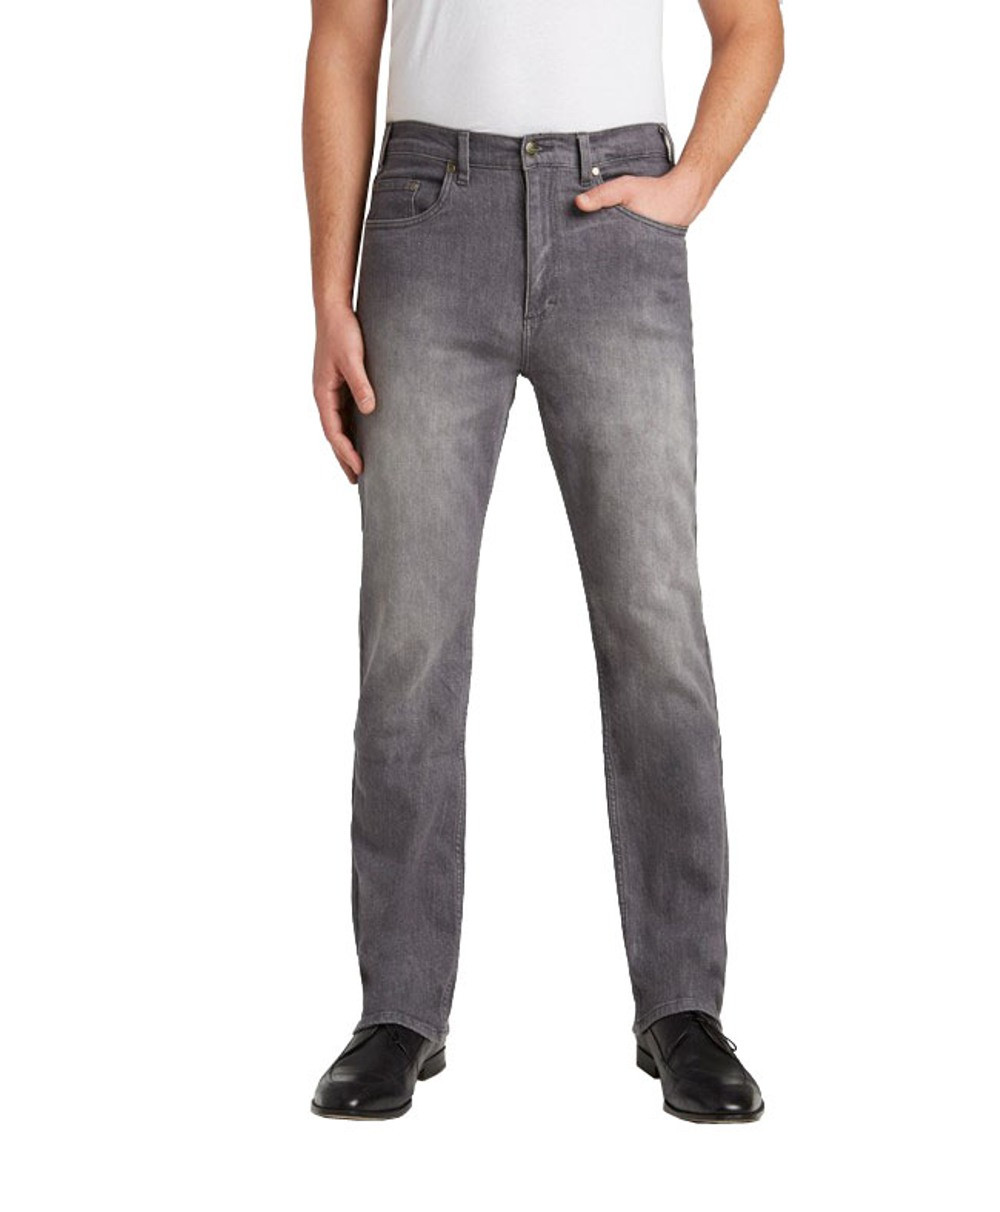 Grand River Grey Stretch Traditional Fit Jeans - Dick Anthony Ltd.